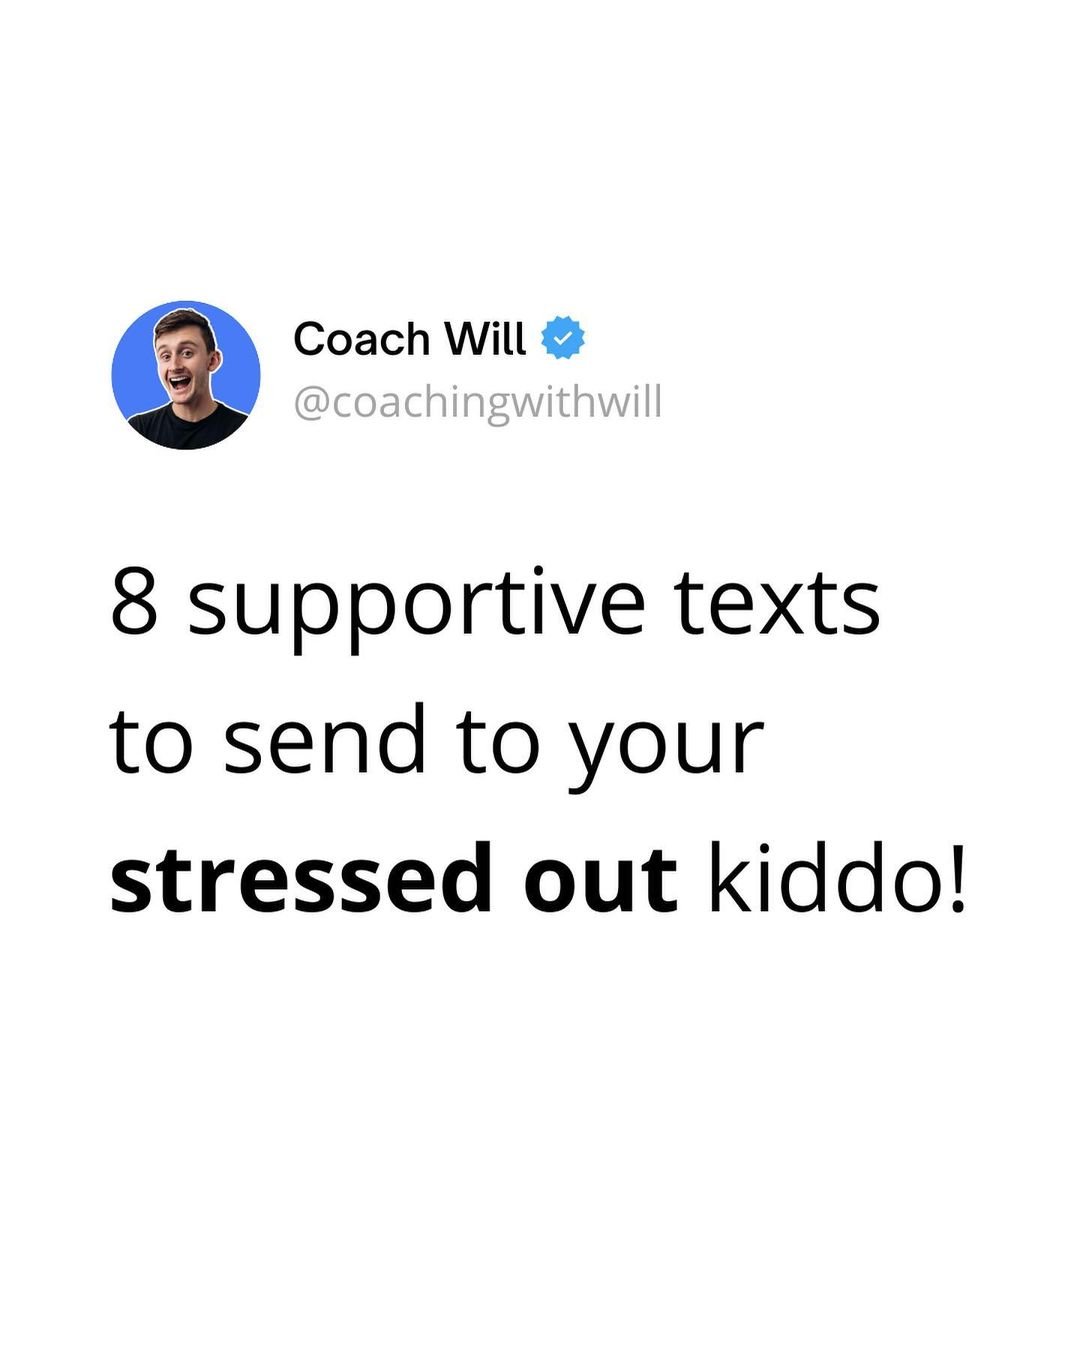 Love these quotes from @coachingwithwill 

#RaisingSparks #character #integrity #raisingkidsright #Parenting #ParentMentors #Parenthacks #Parents #Mom #Momlife #dadlife #Parentlife #ParentingTips #parenthood #motherhood #motherhoodrising #mentoring #